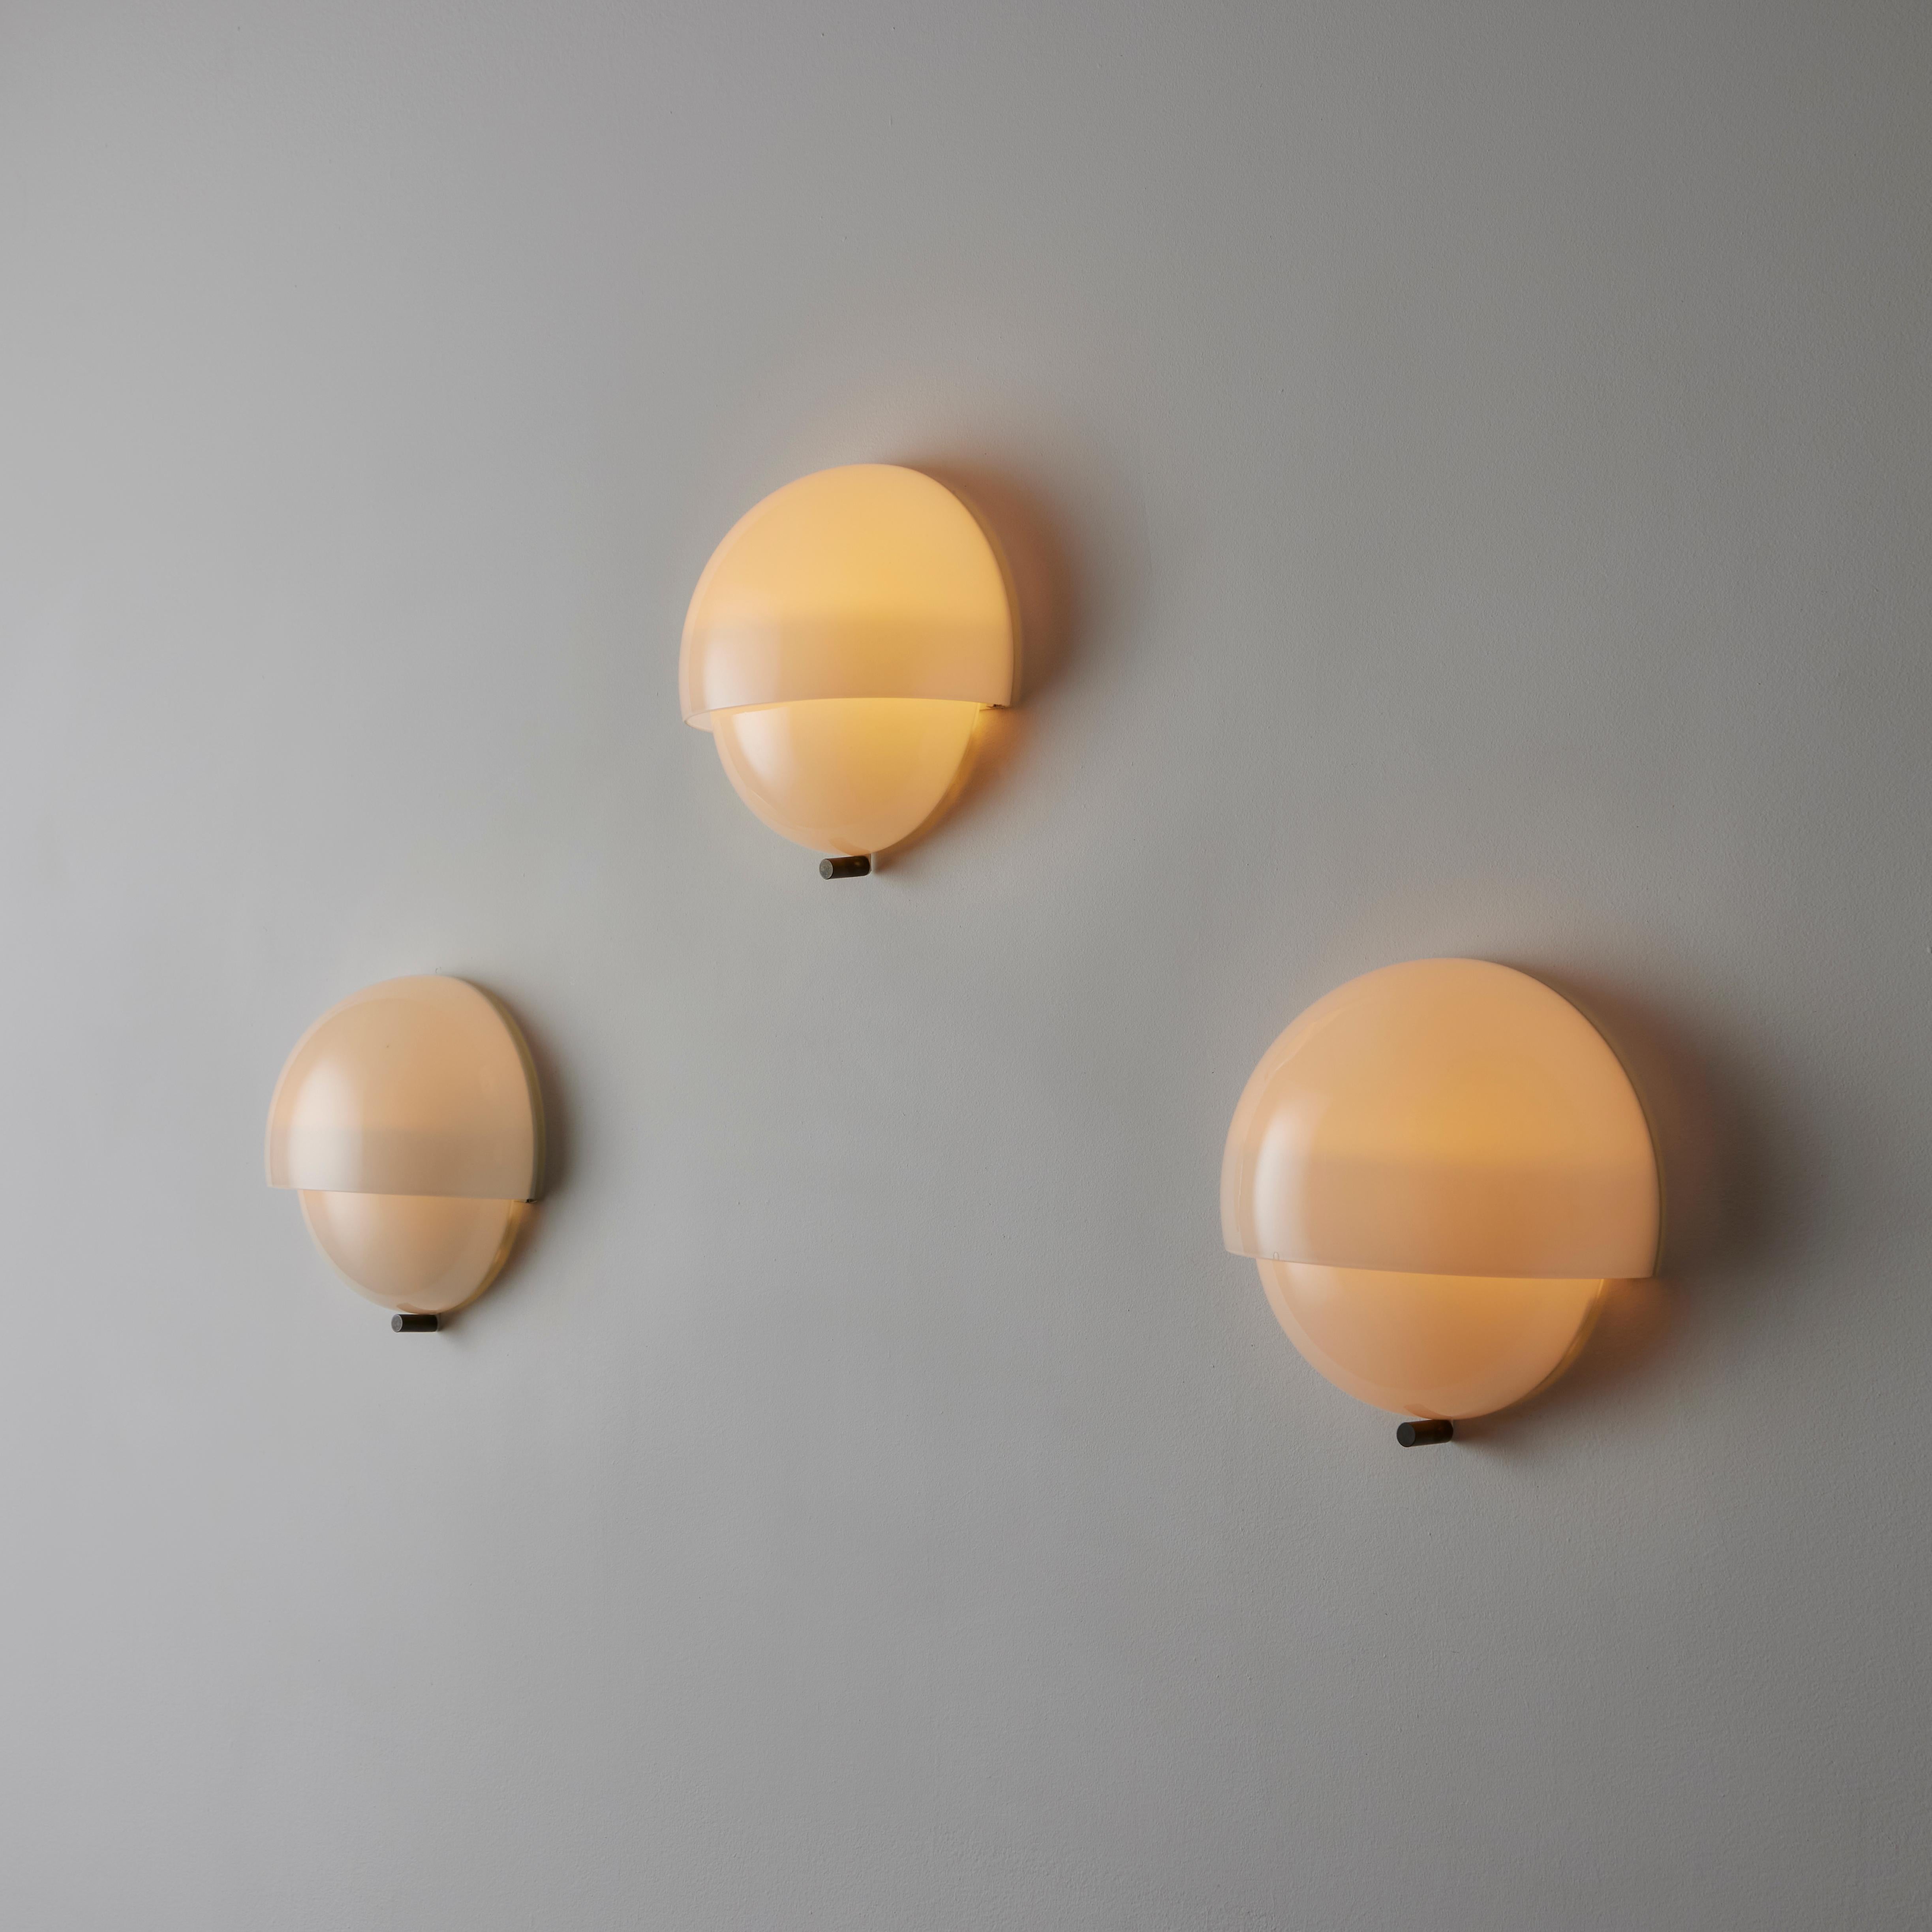 Mania Sconces by Vico Magistretti for Artemide. Designed and manufactured in Italy, circa 1960. Minimal half layered half sphere sconce made from delicate opaline glass. Each sconce holds two E14 socket types, adapted for the US. We recommend using